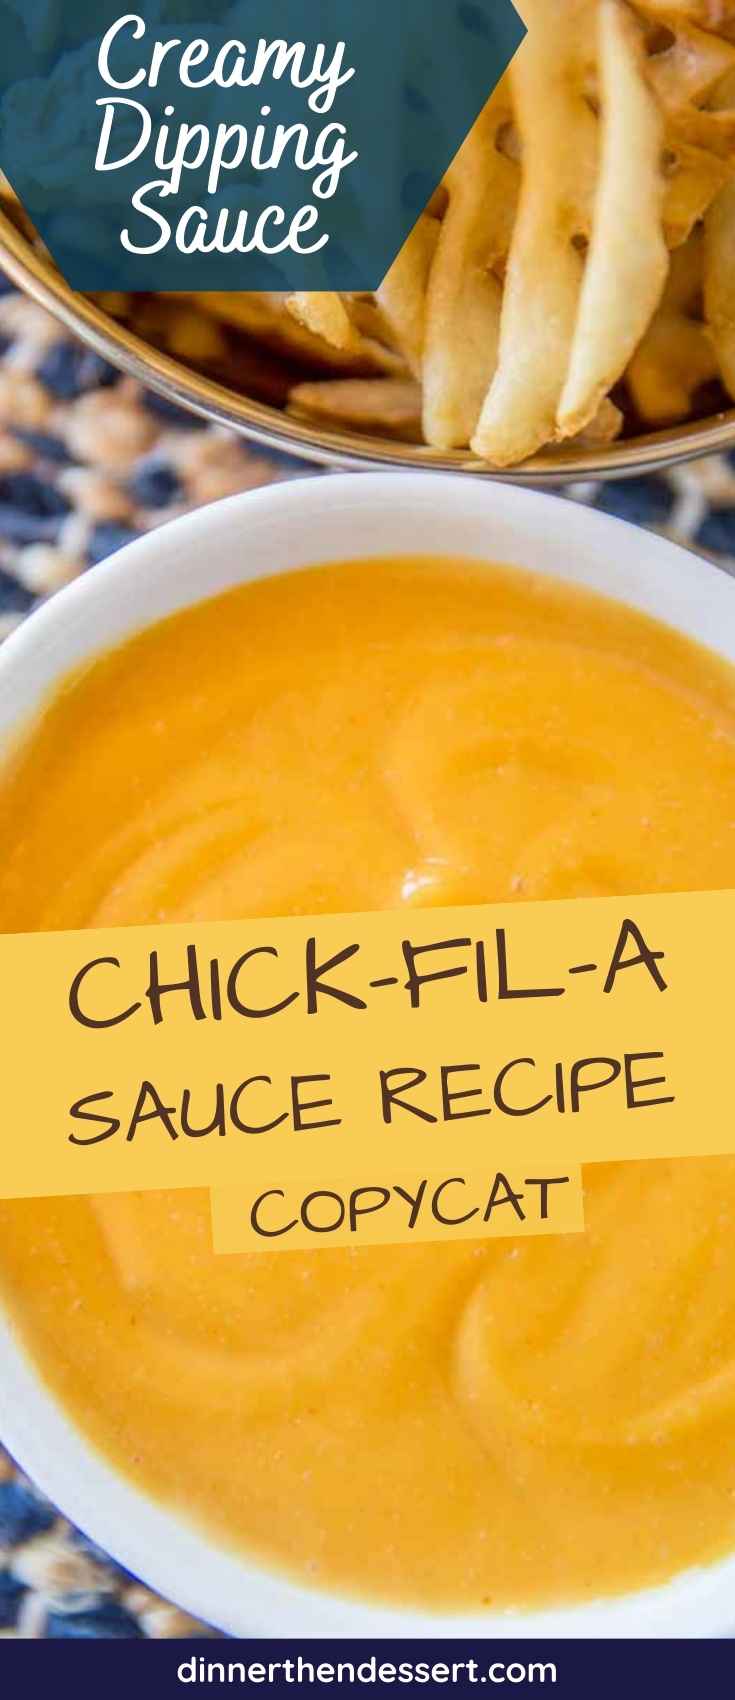 Chick-fil-A Sauce cup Pin 1